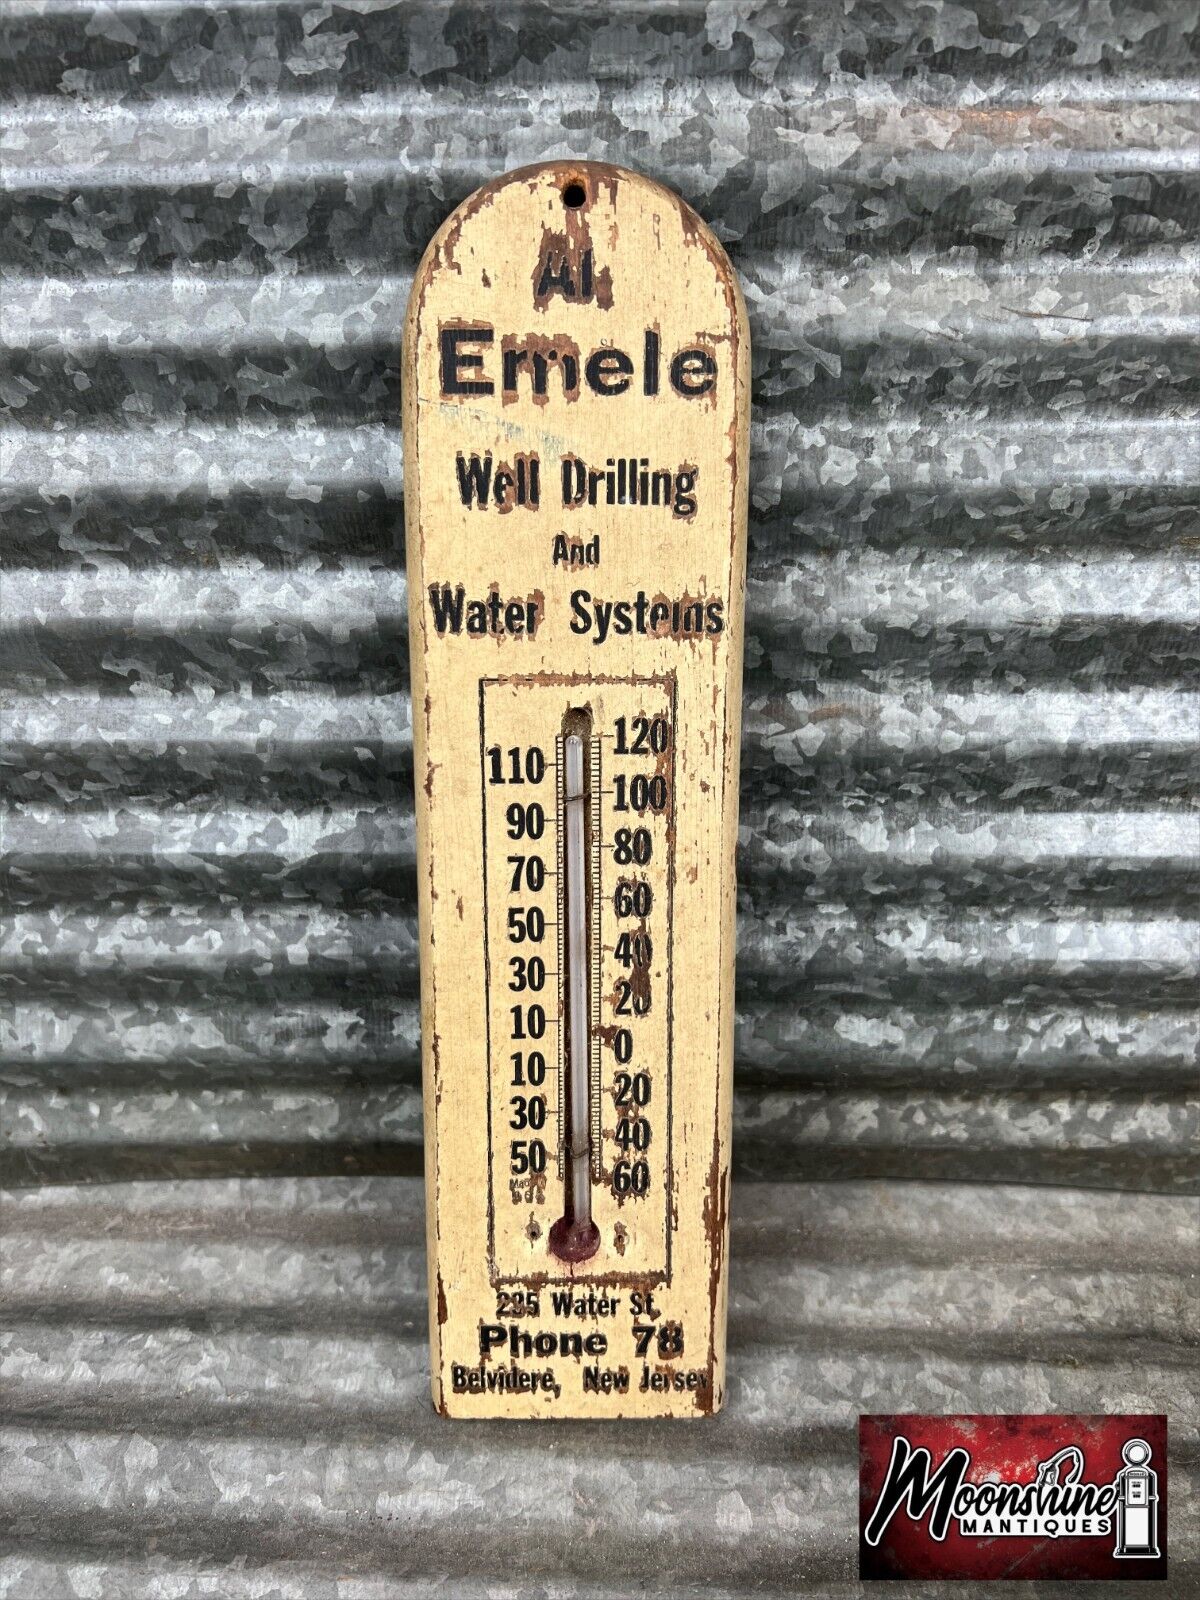 Vtg Al Emele Well Drilling Water Systems Thermometer Sign - Belvidere New Jersey